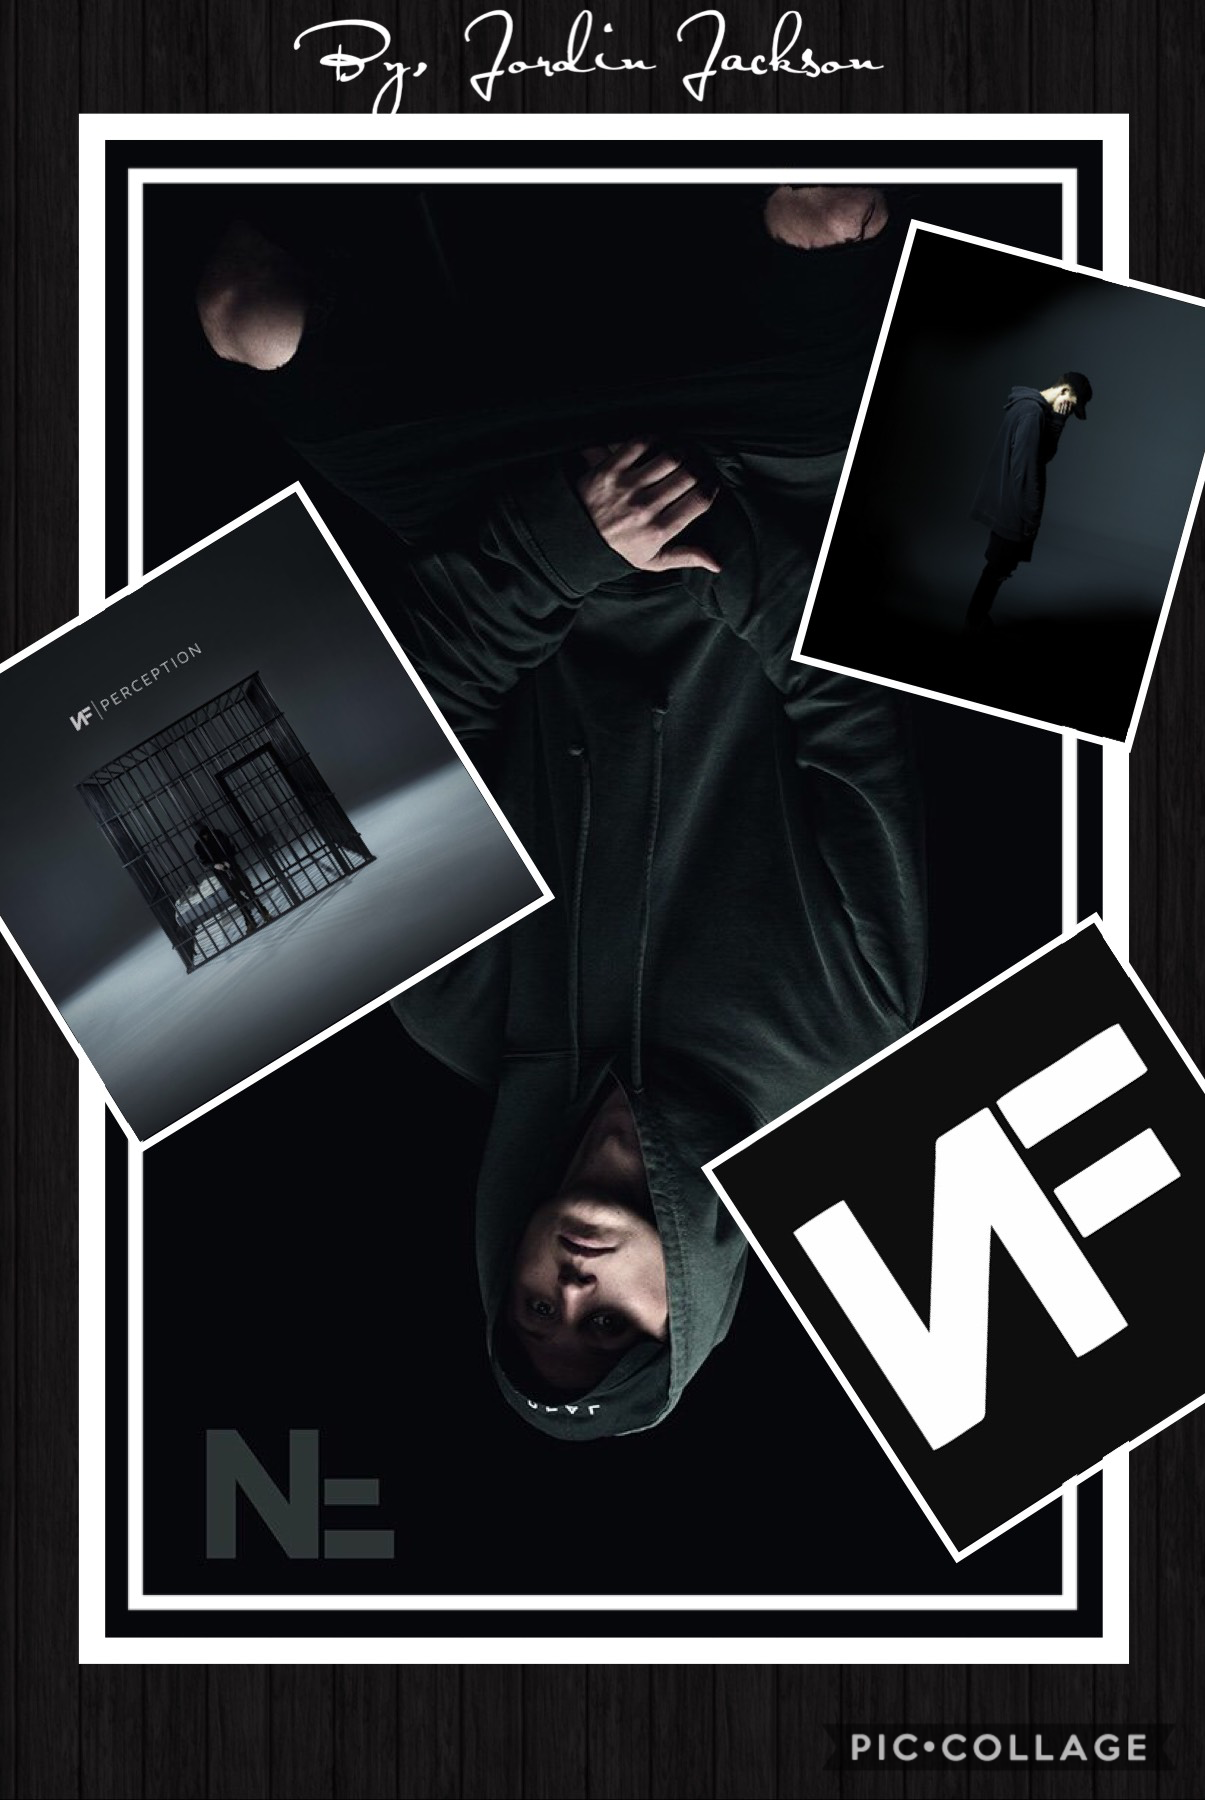 Nf is Real rap🖤